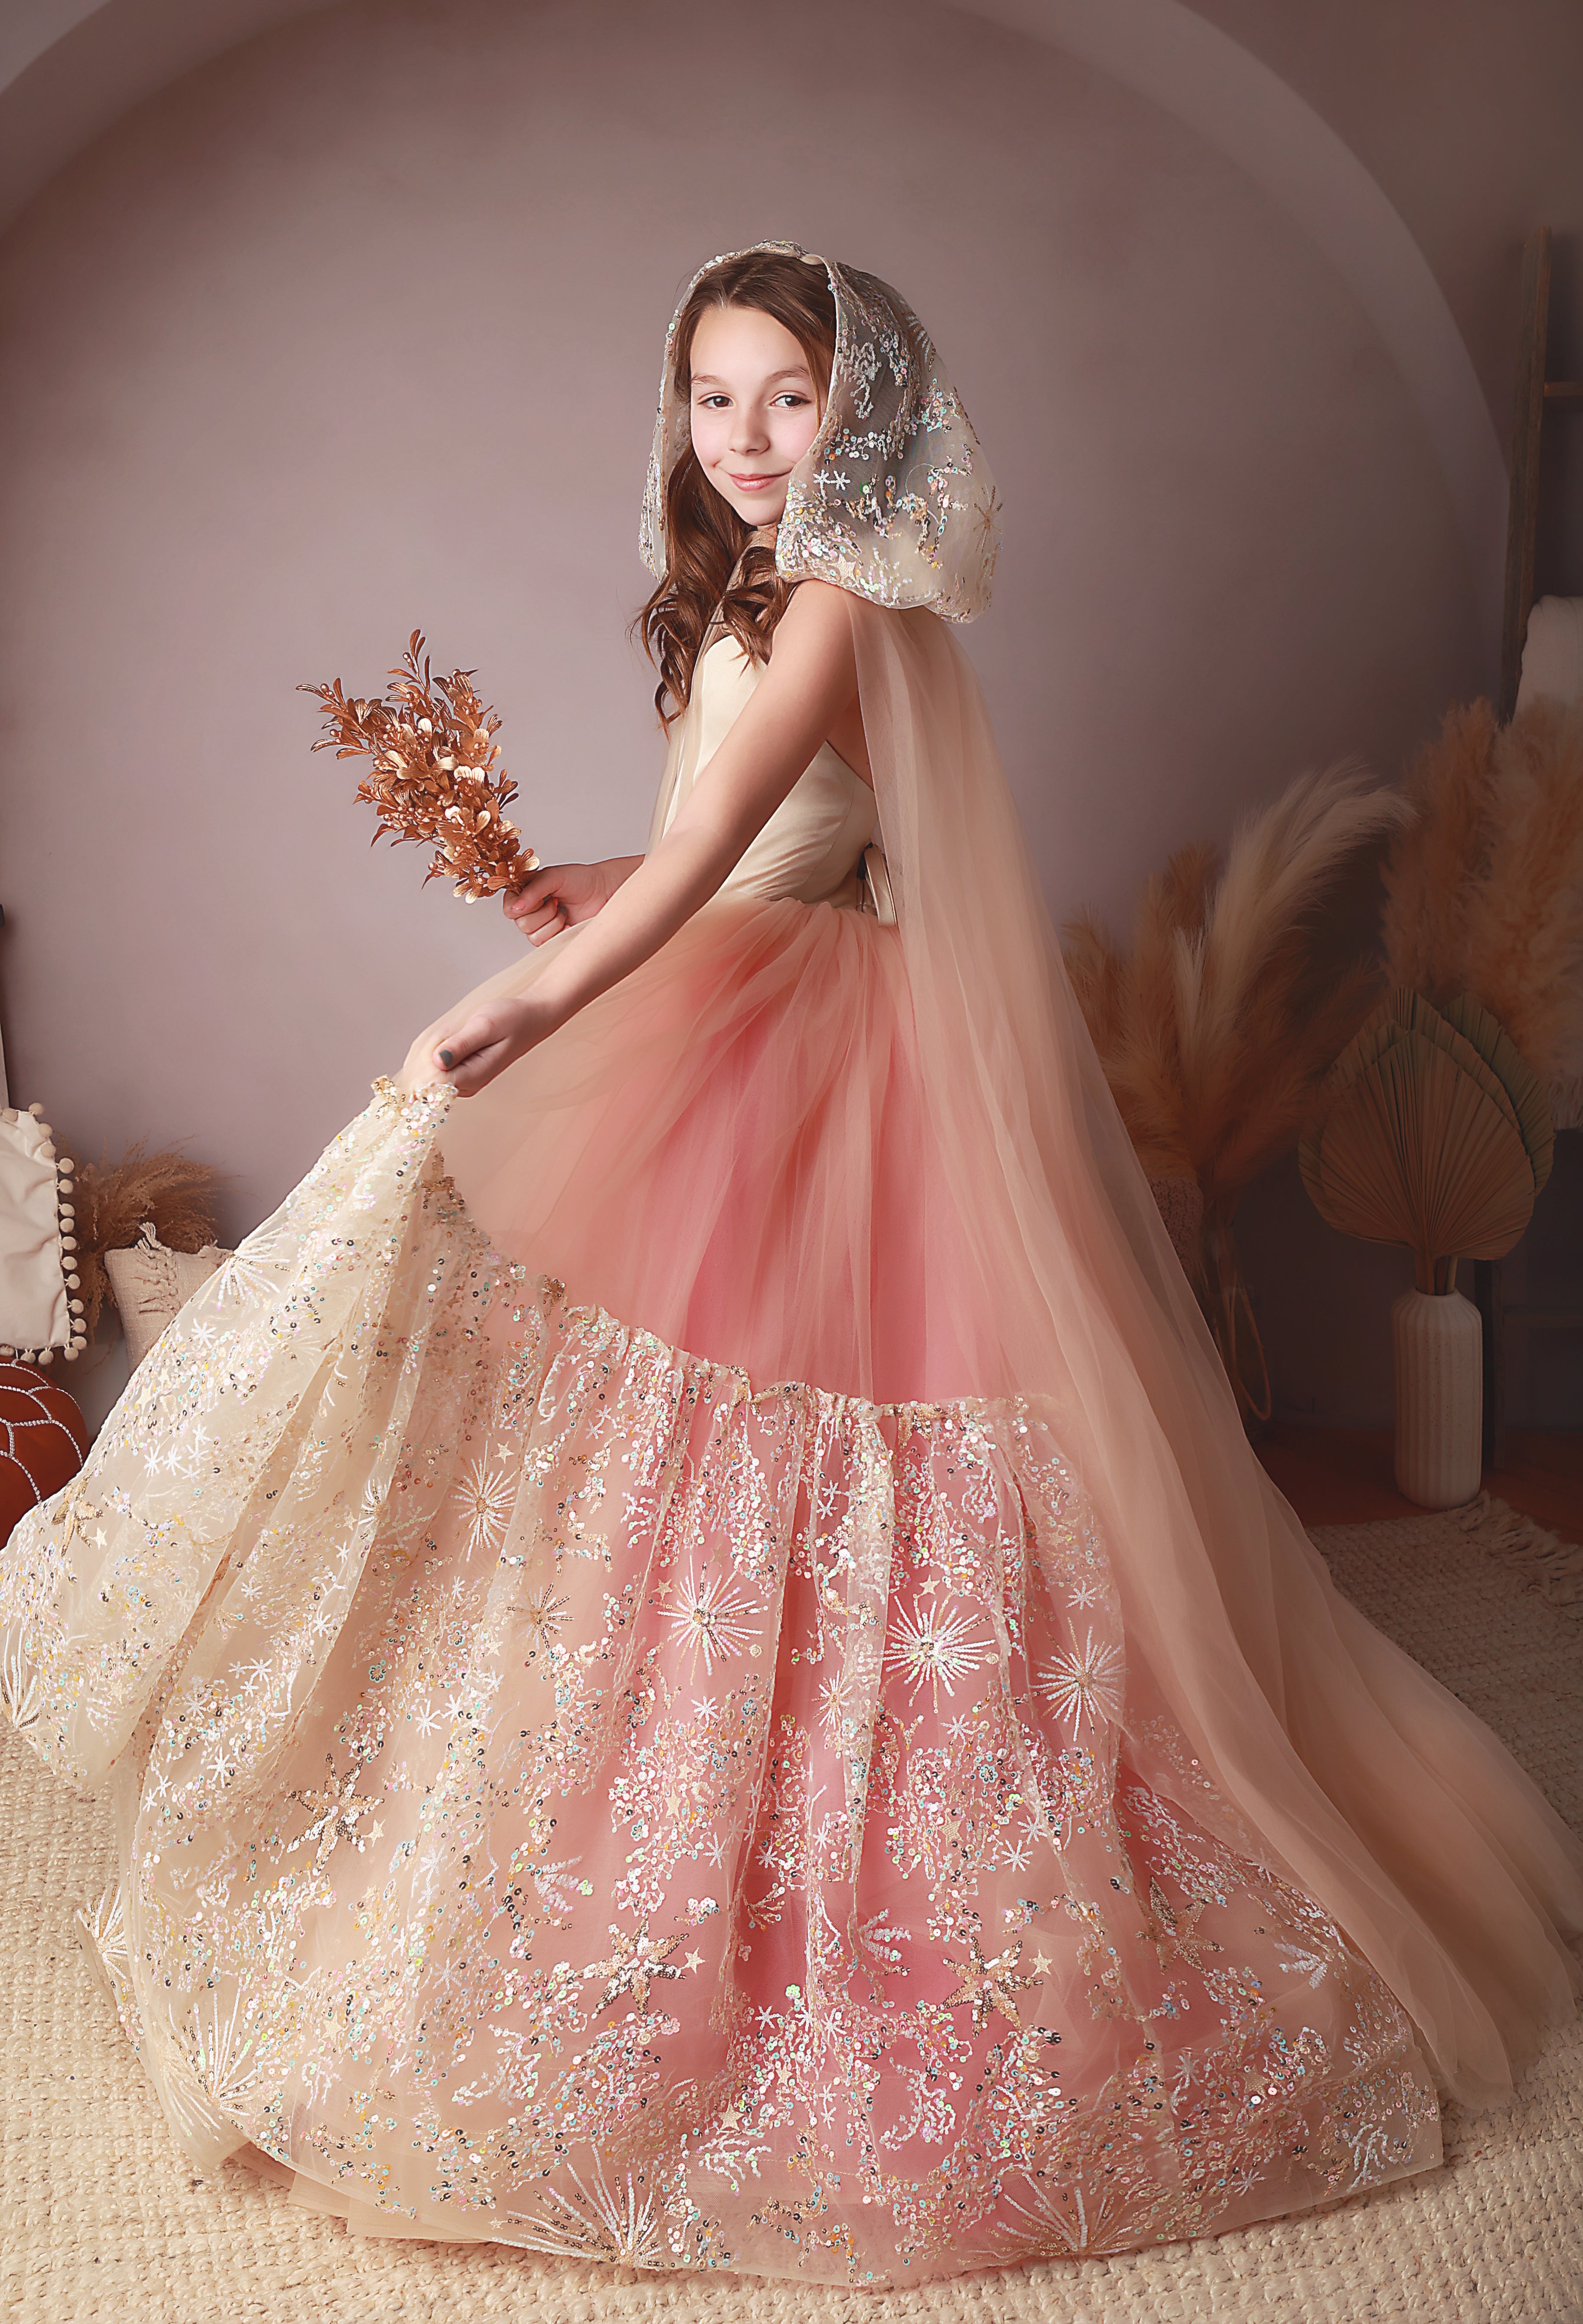 Children's gowns for dream dress sessions